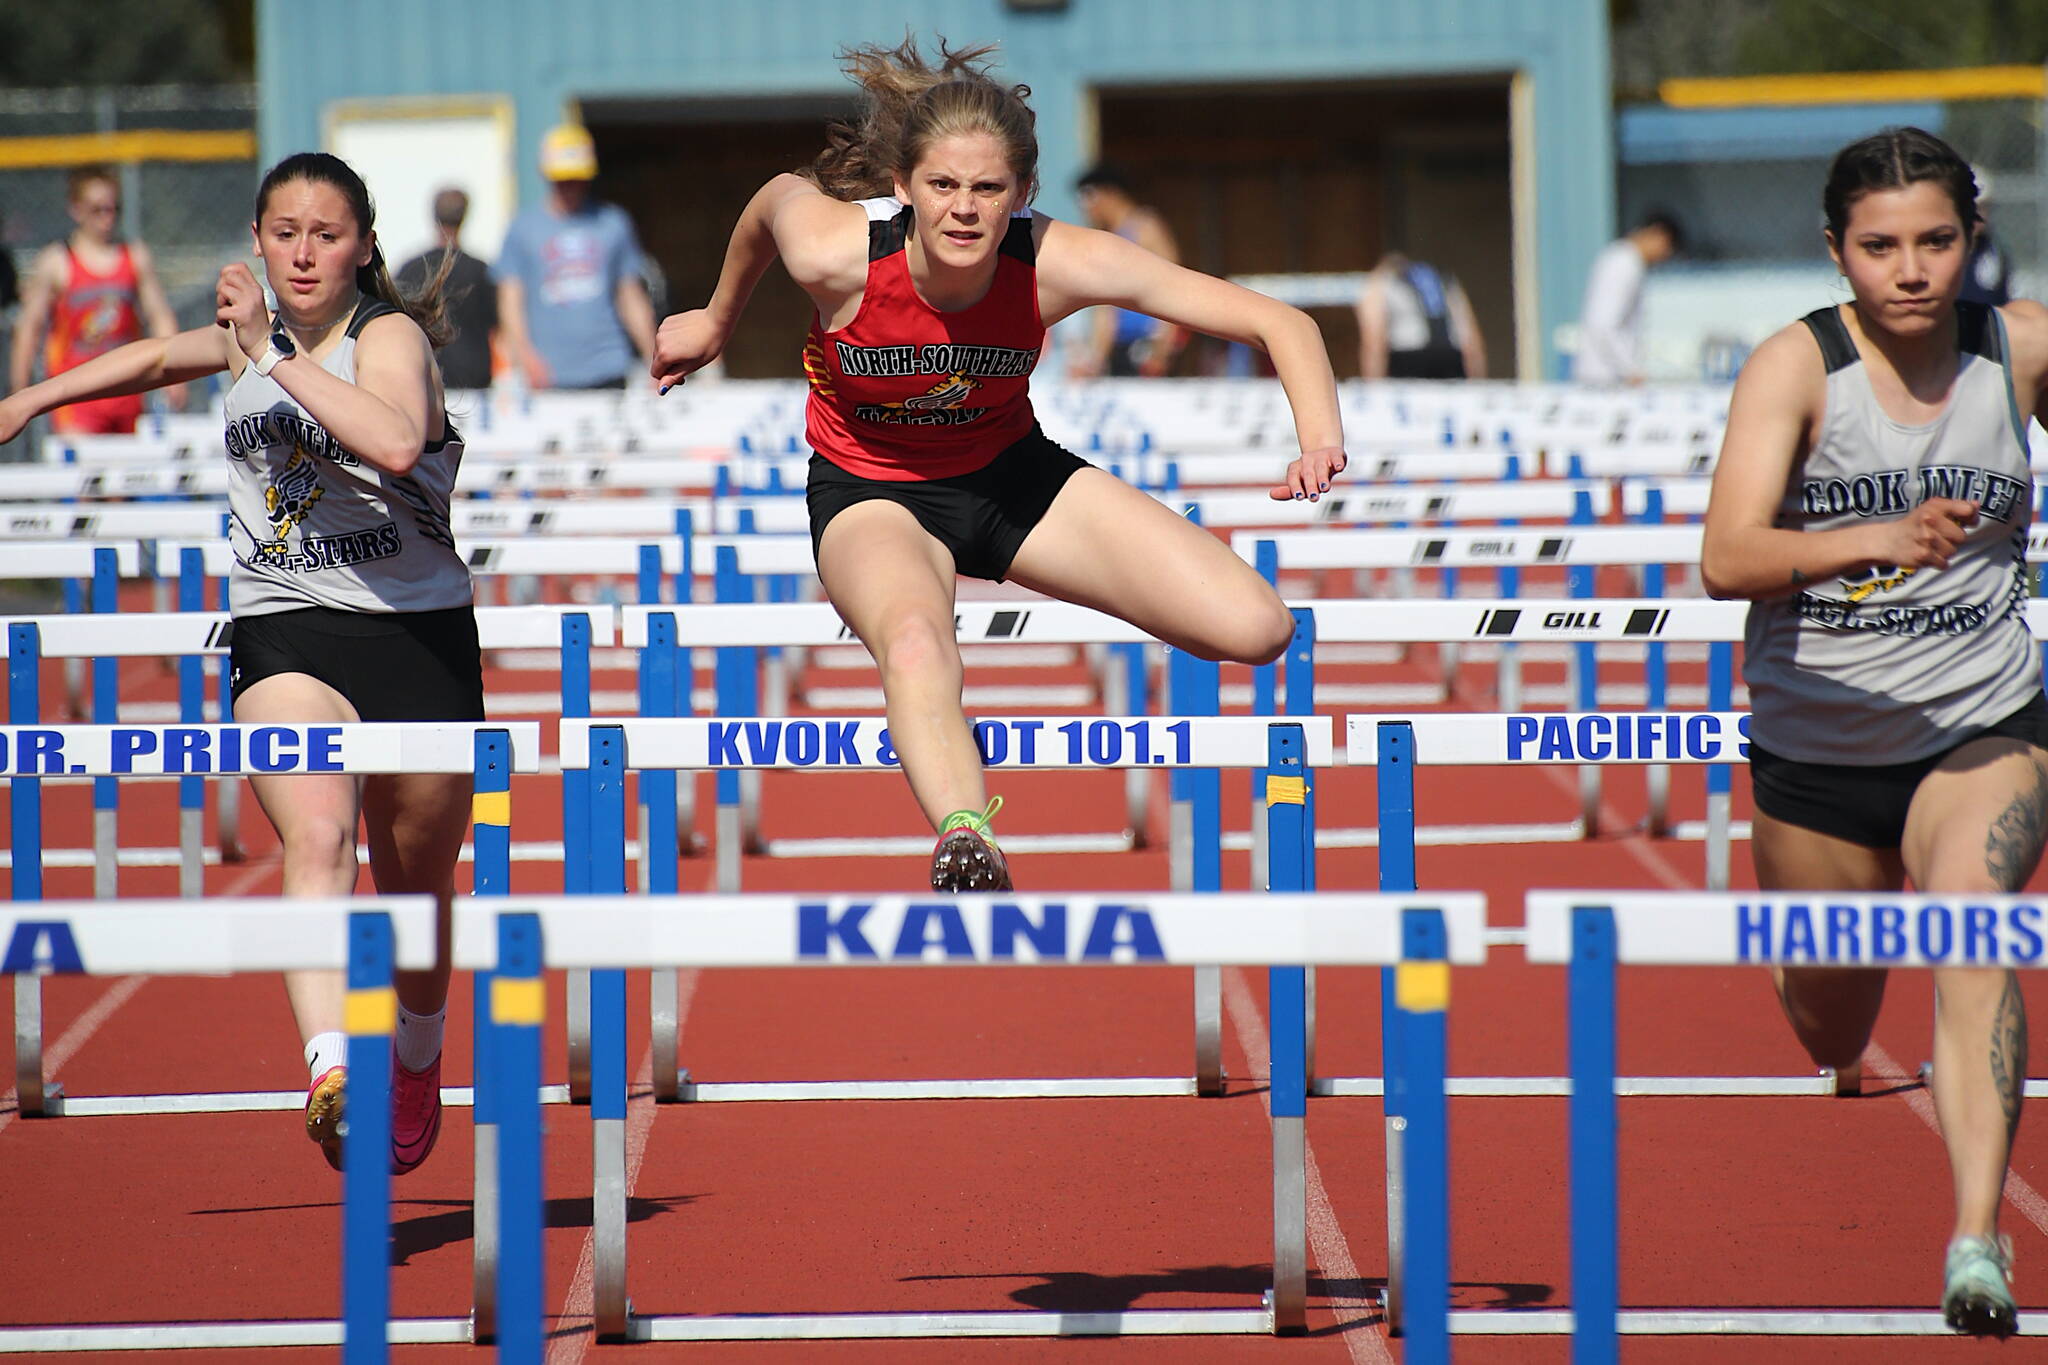 TMHS senior Mallory Welling, running for team North/Southeast, competes in the 100 hurdles at the Brian Young Invitational on Saturday in Kodiak. (Photo courtesy Brandi Adams)